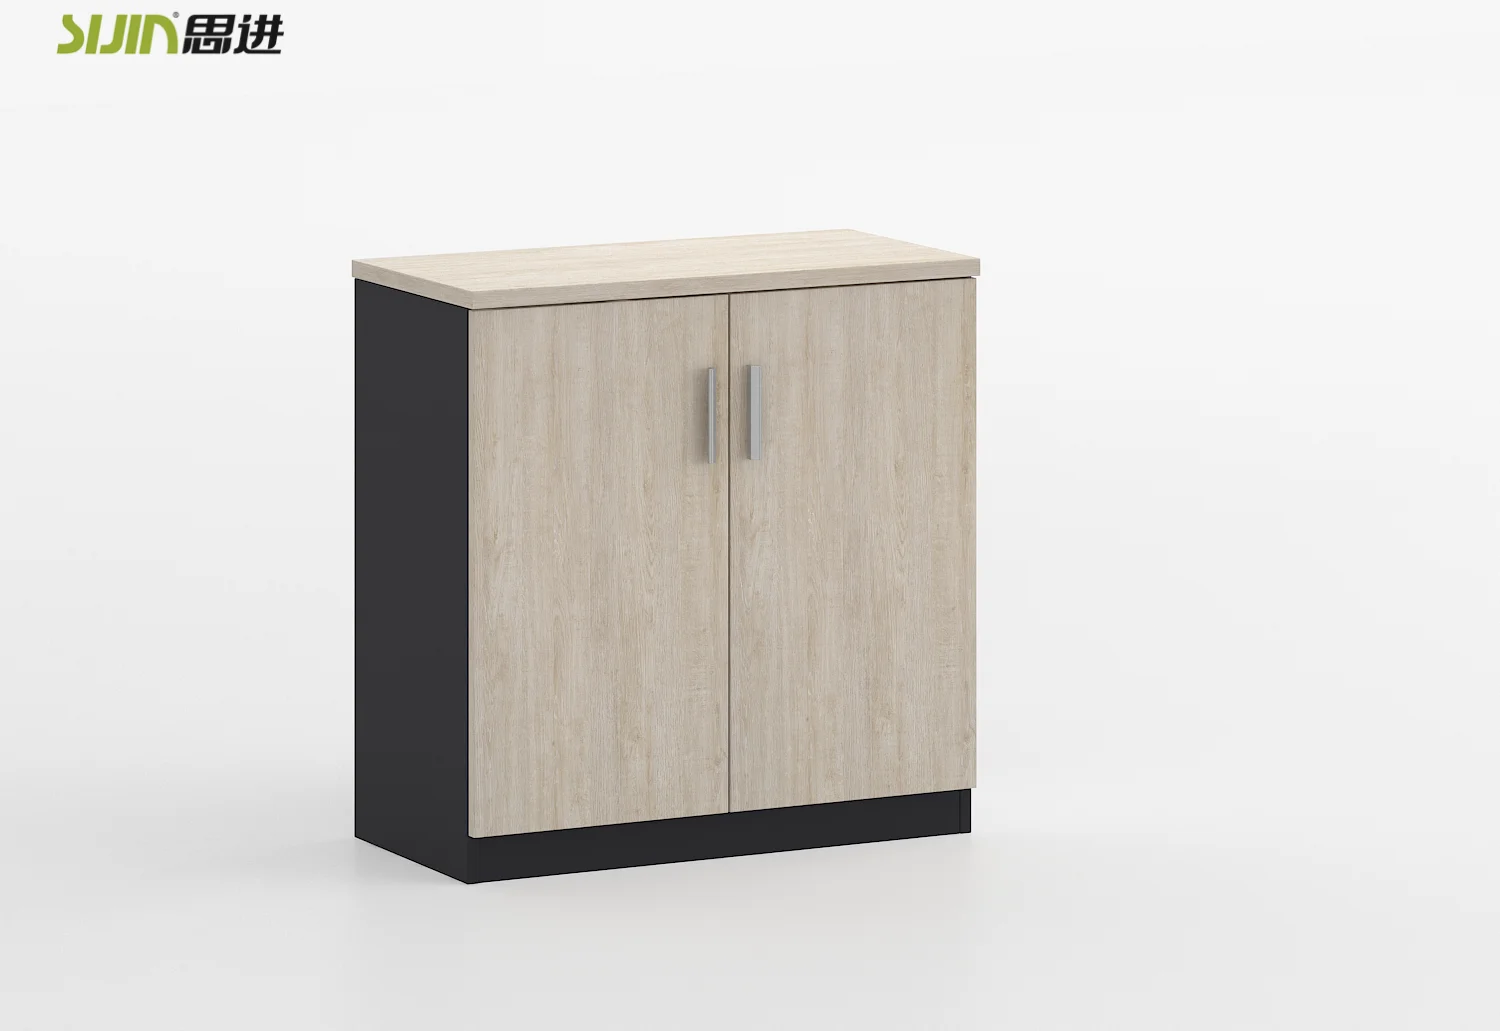 Universal Office Coffee Cabinets Wall Cabinet Wooden Tea Cabinet